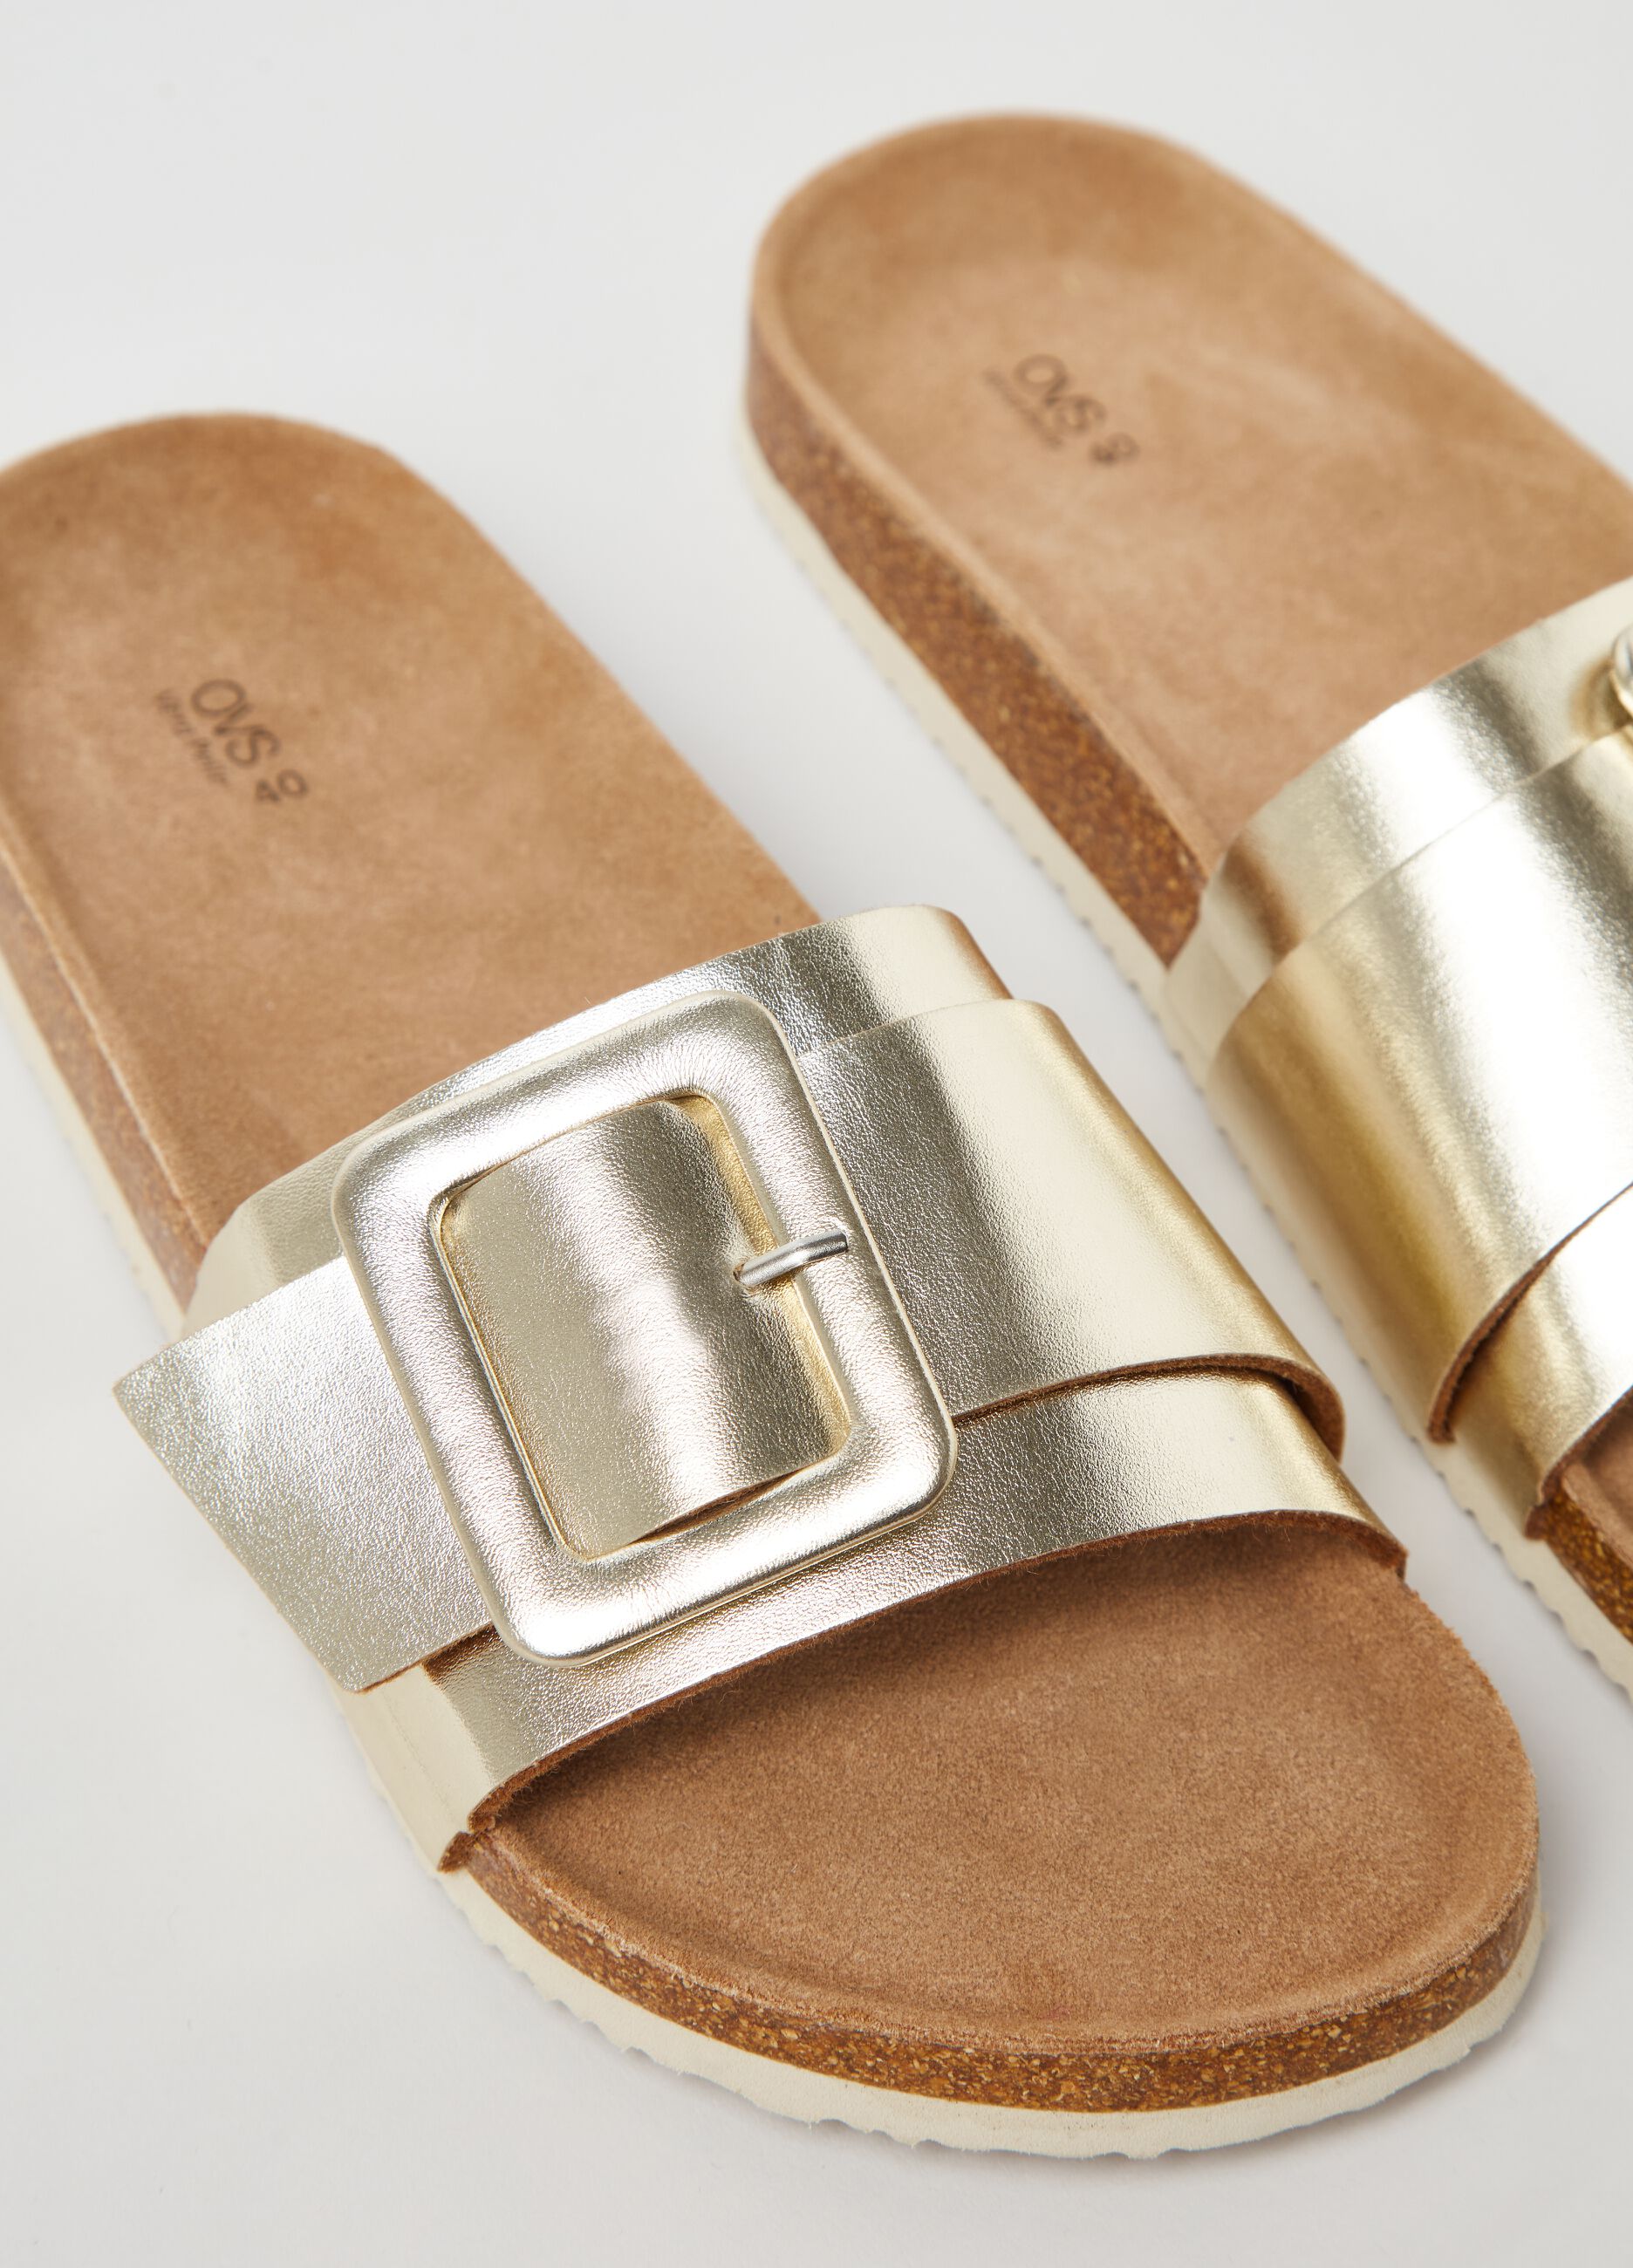 Flat sandals with band